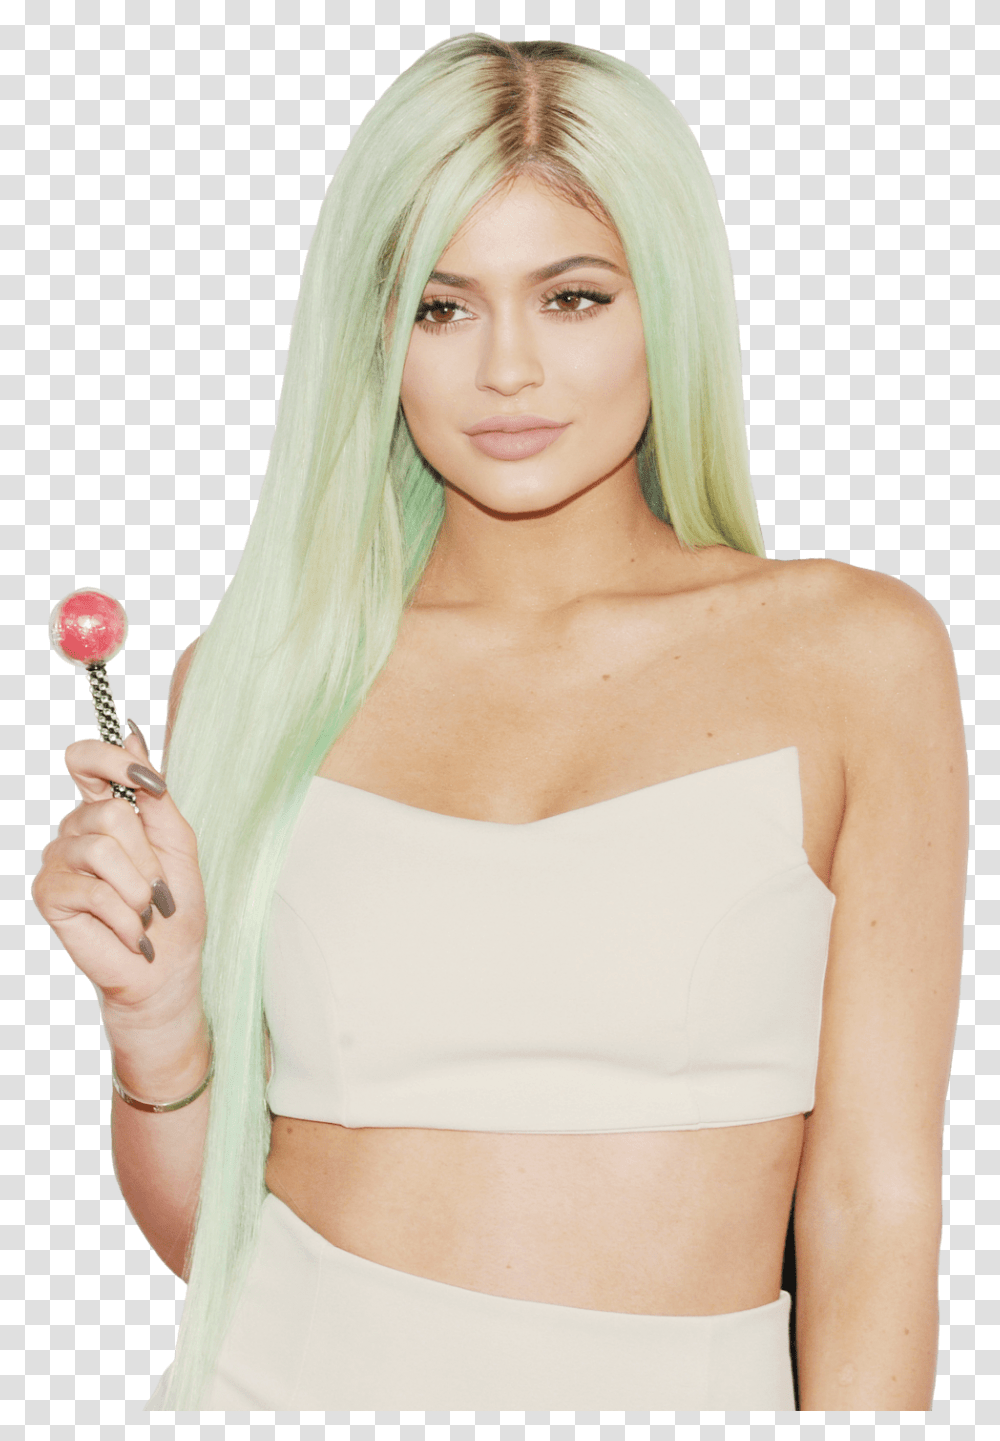 Kylie Jenner Lollipop Image Kylie Jenner Background, Hair, Person, Human, Candy Transparent Png